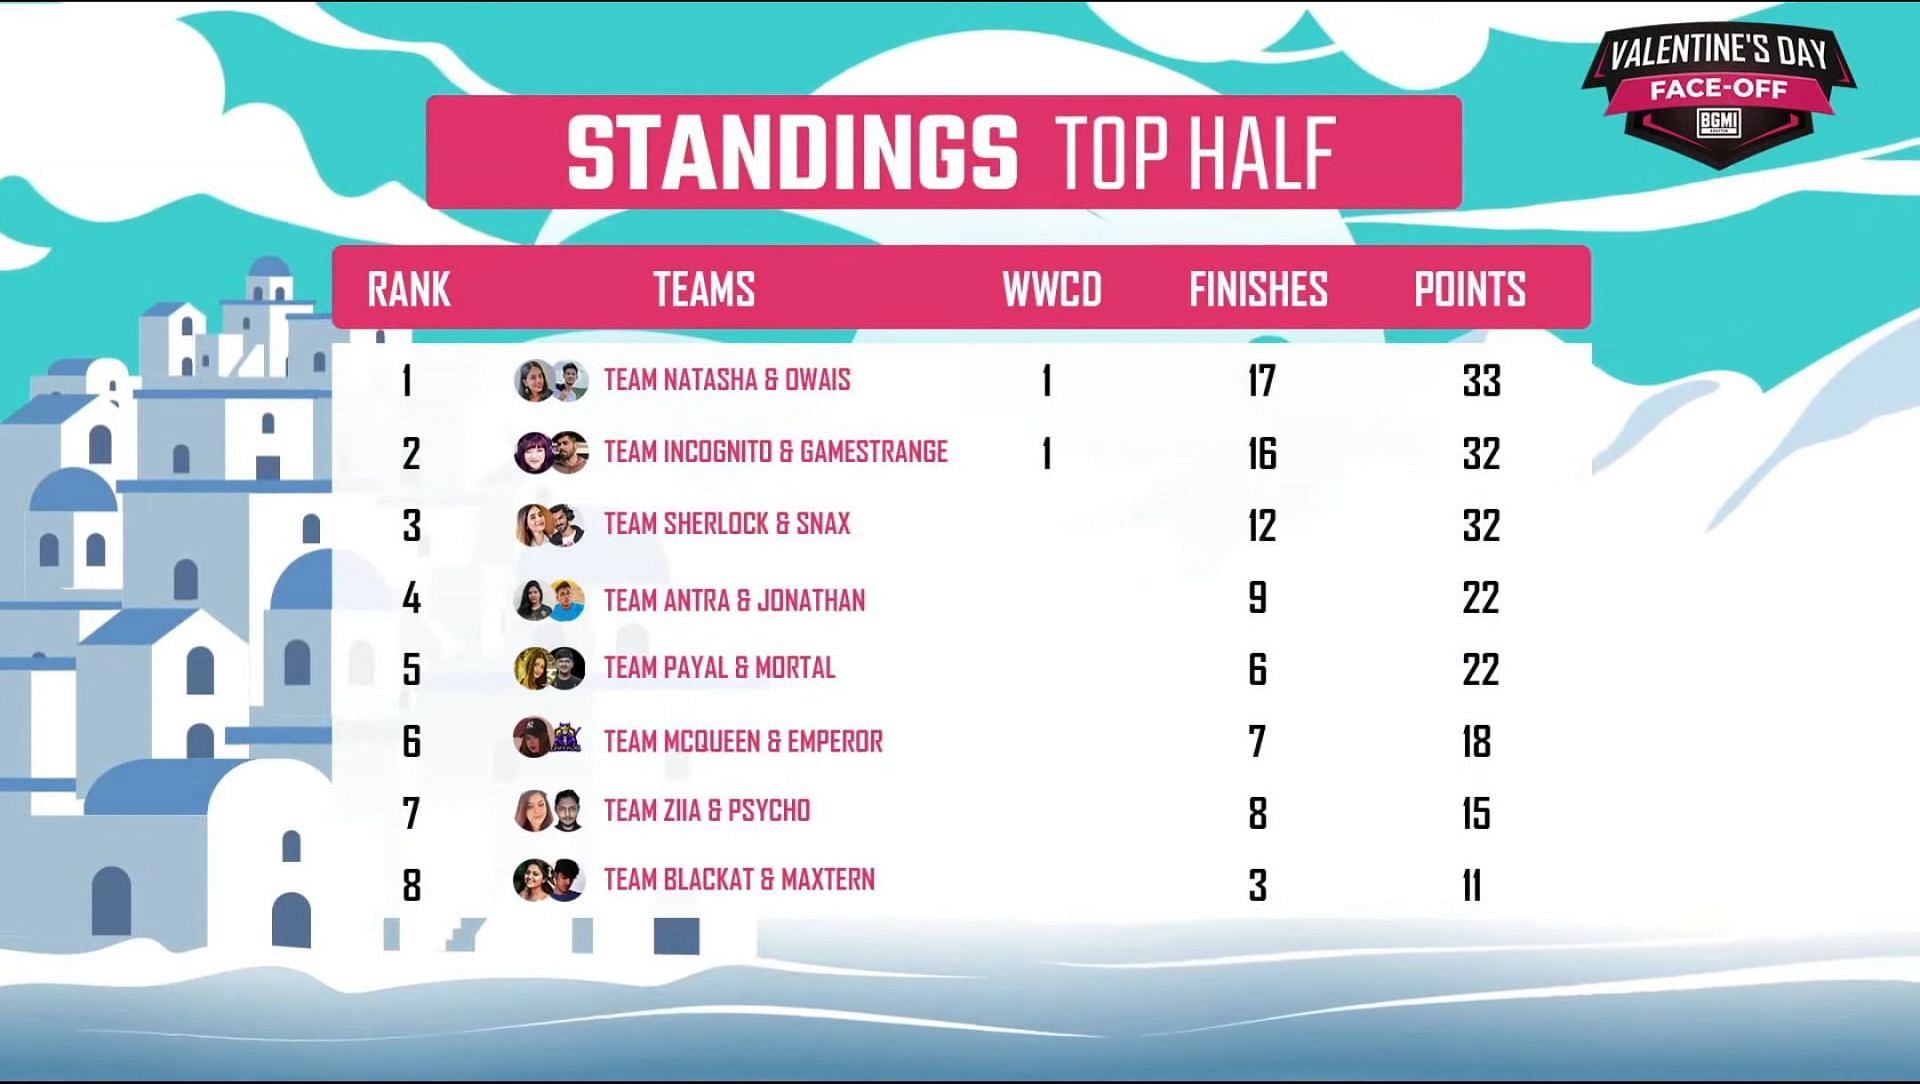 Standings top half of Valentine&#039;s Day Face-Off (Image via BGMI)